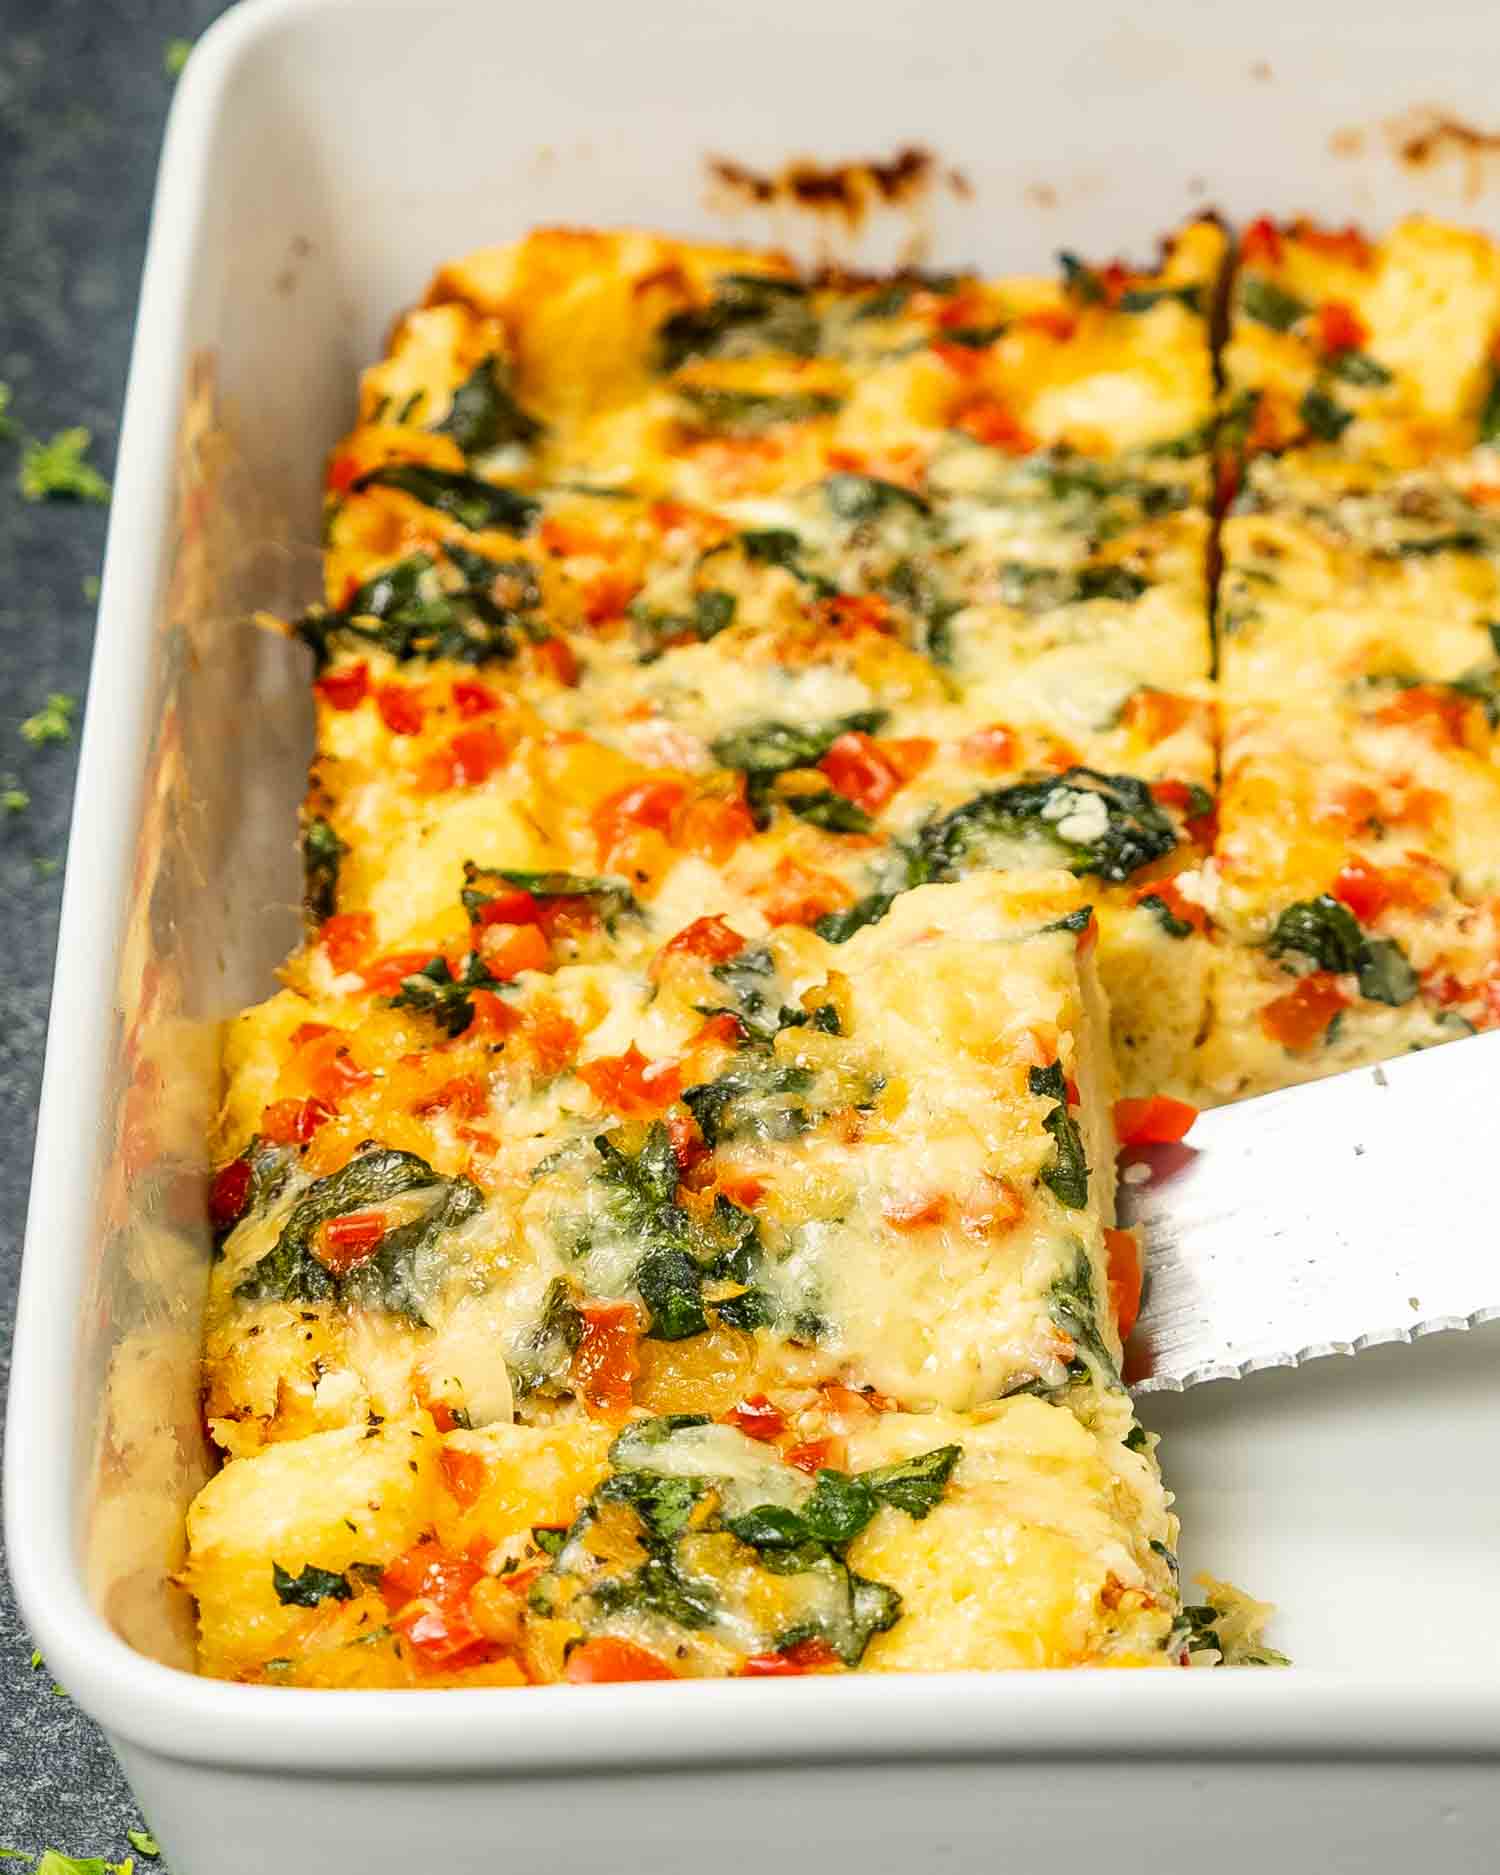 freshly baked strata cut into pieces in a white casserole dish.